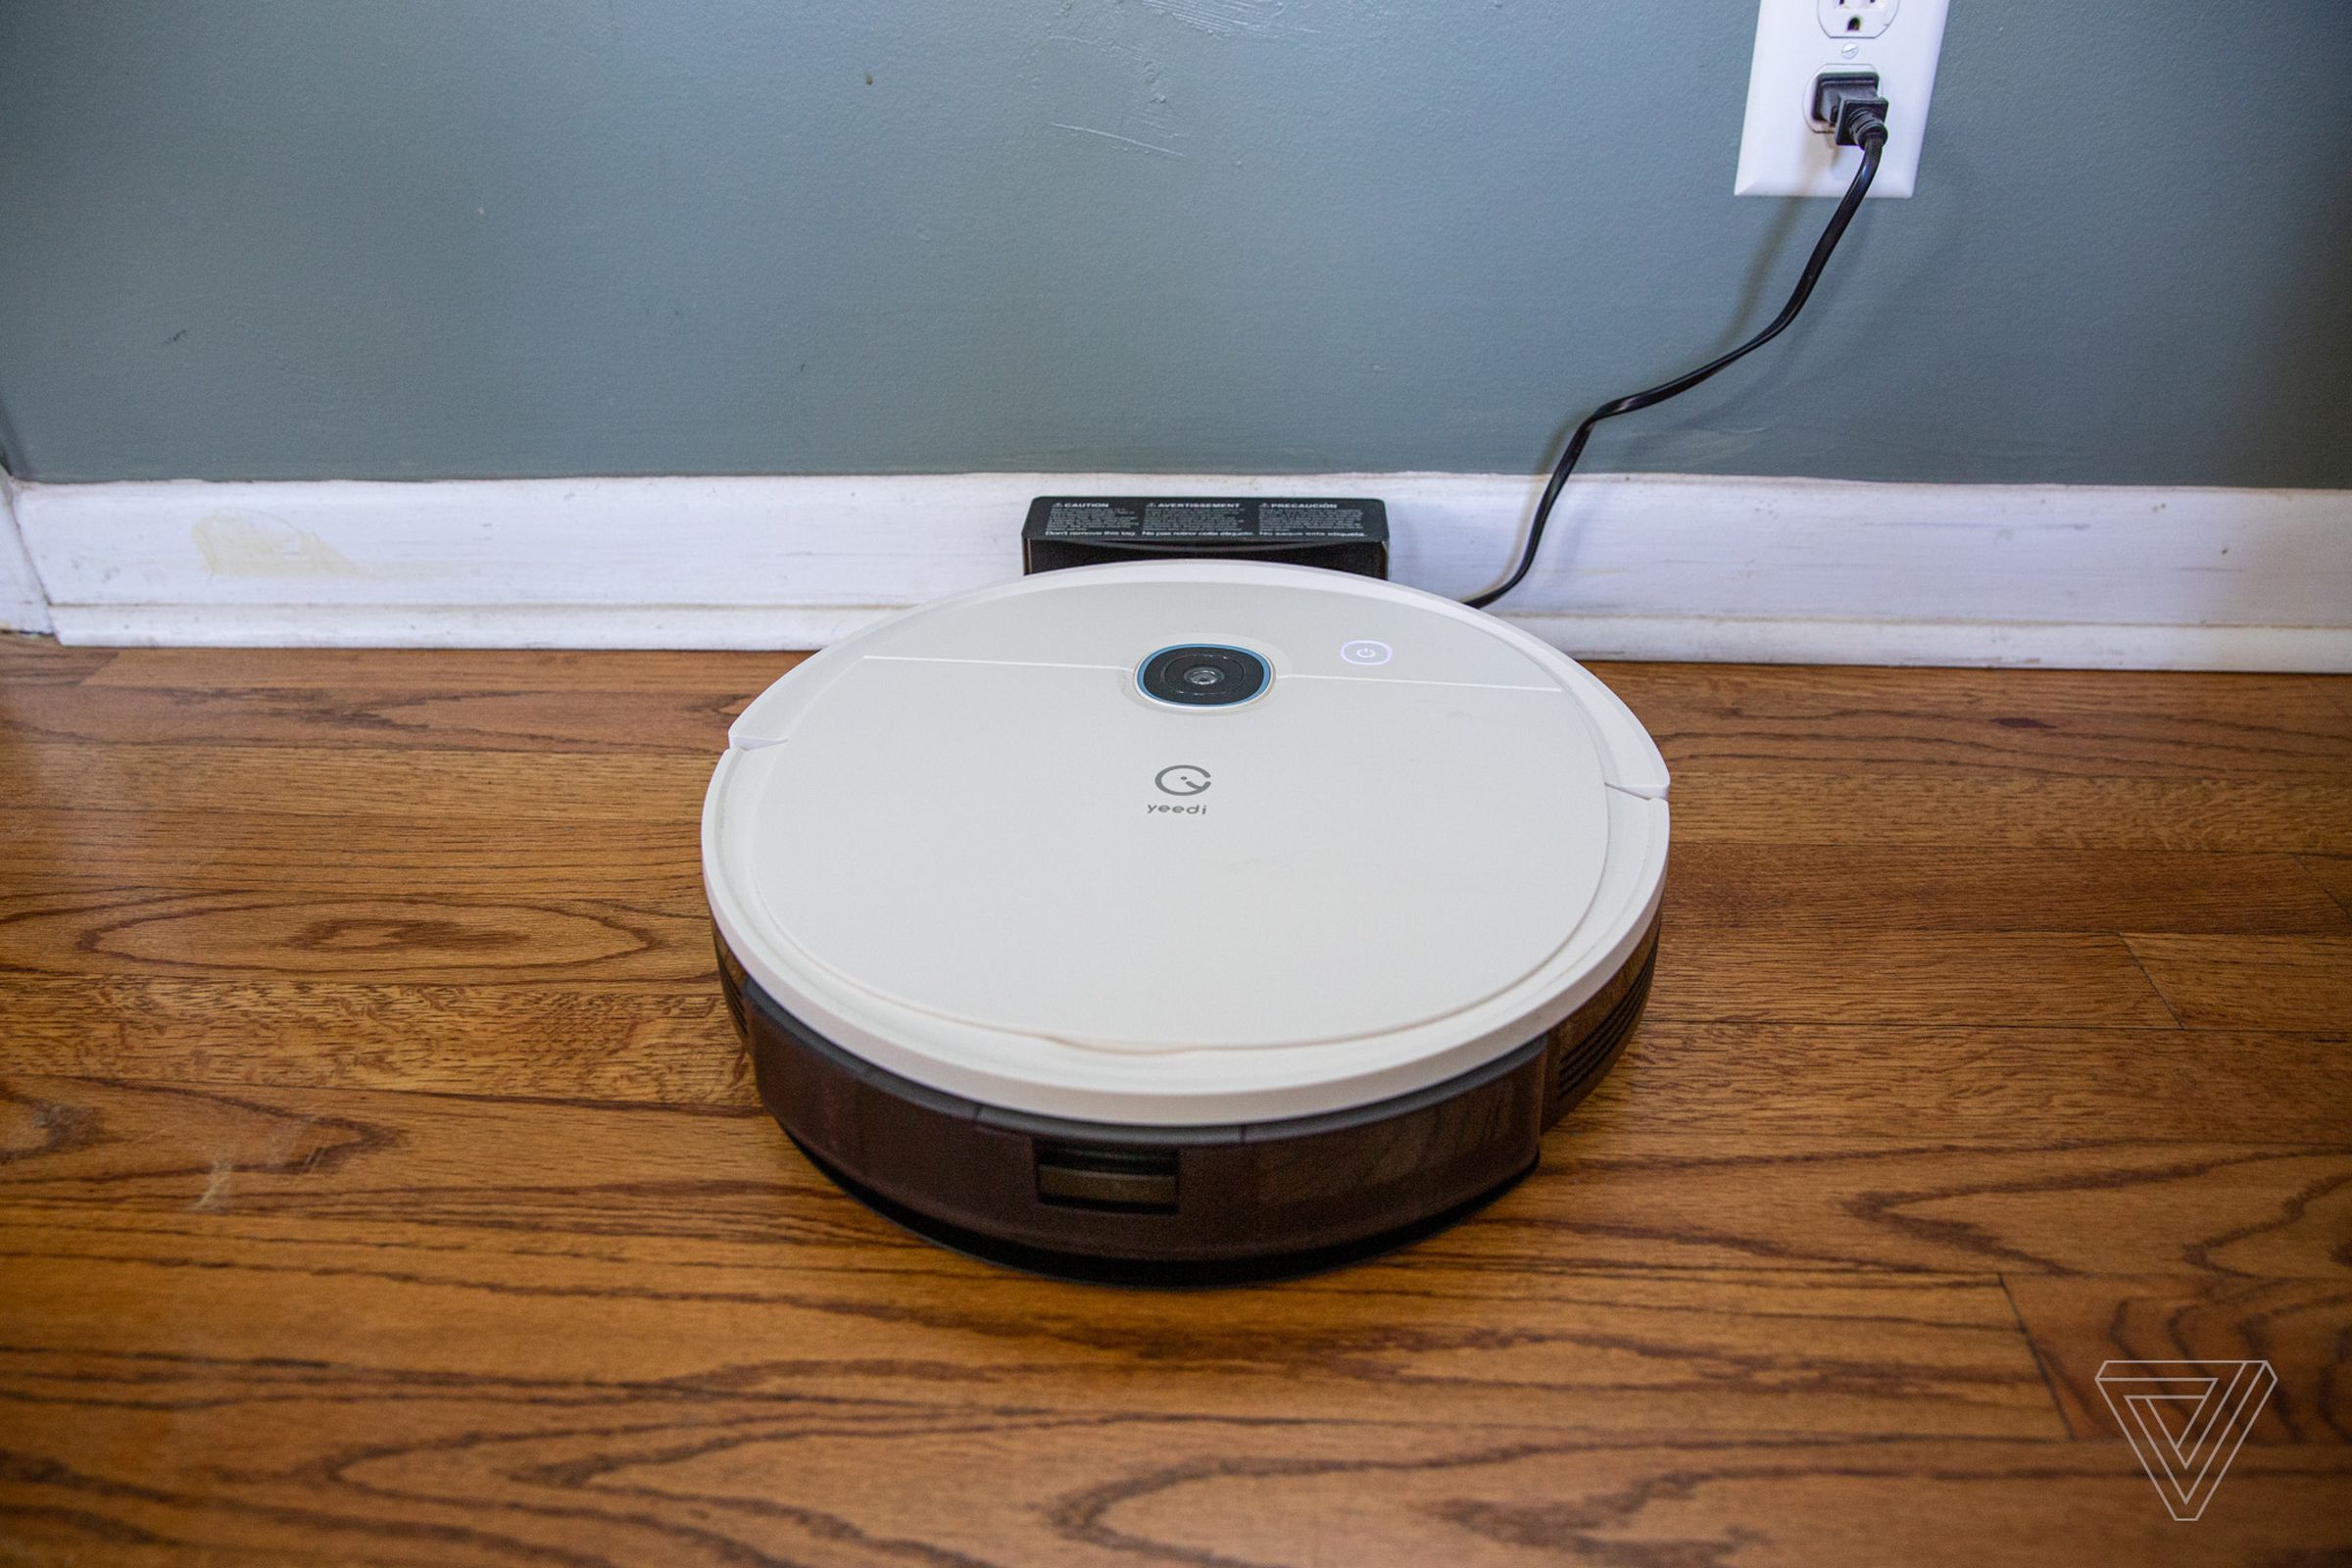 Yeedi's Vac 2 Pro robot vacuum cleaner sits on a hardwood floor and charges against a wall.